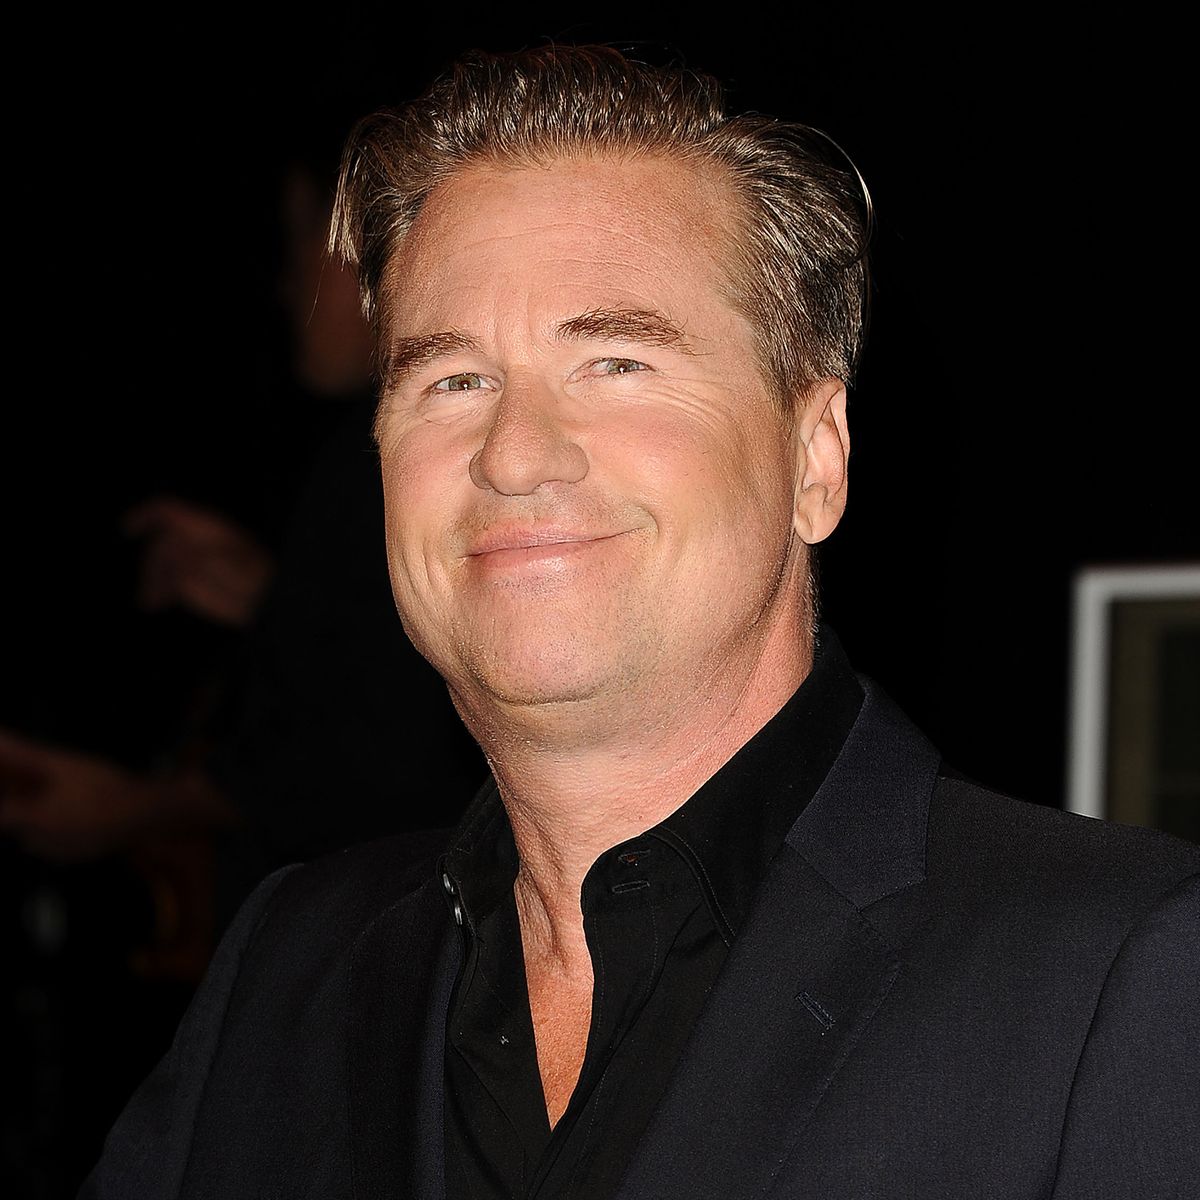 23rd Annual Simply Shakespeare Benefit Reading Of "The Two Gentlemen Of Verona"SANTA MONICA, CA - SEPTEMBER 25: Actor Val Kilmer attends the 23rd annual Simply Shakespeare benefit reading of "The Two Gentlemen of Verona" at The Eli and Edythe Broad Stage on September 25, 2013 in Santa Monica, California. (Photo by Jason LaVeris/FilmMagic)